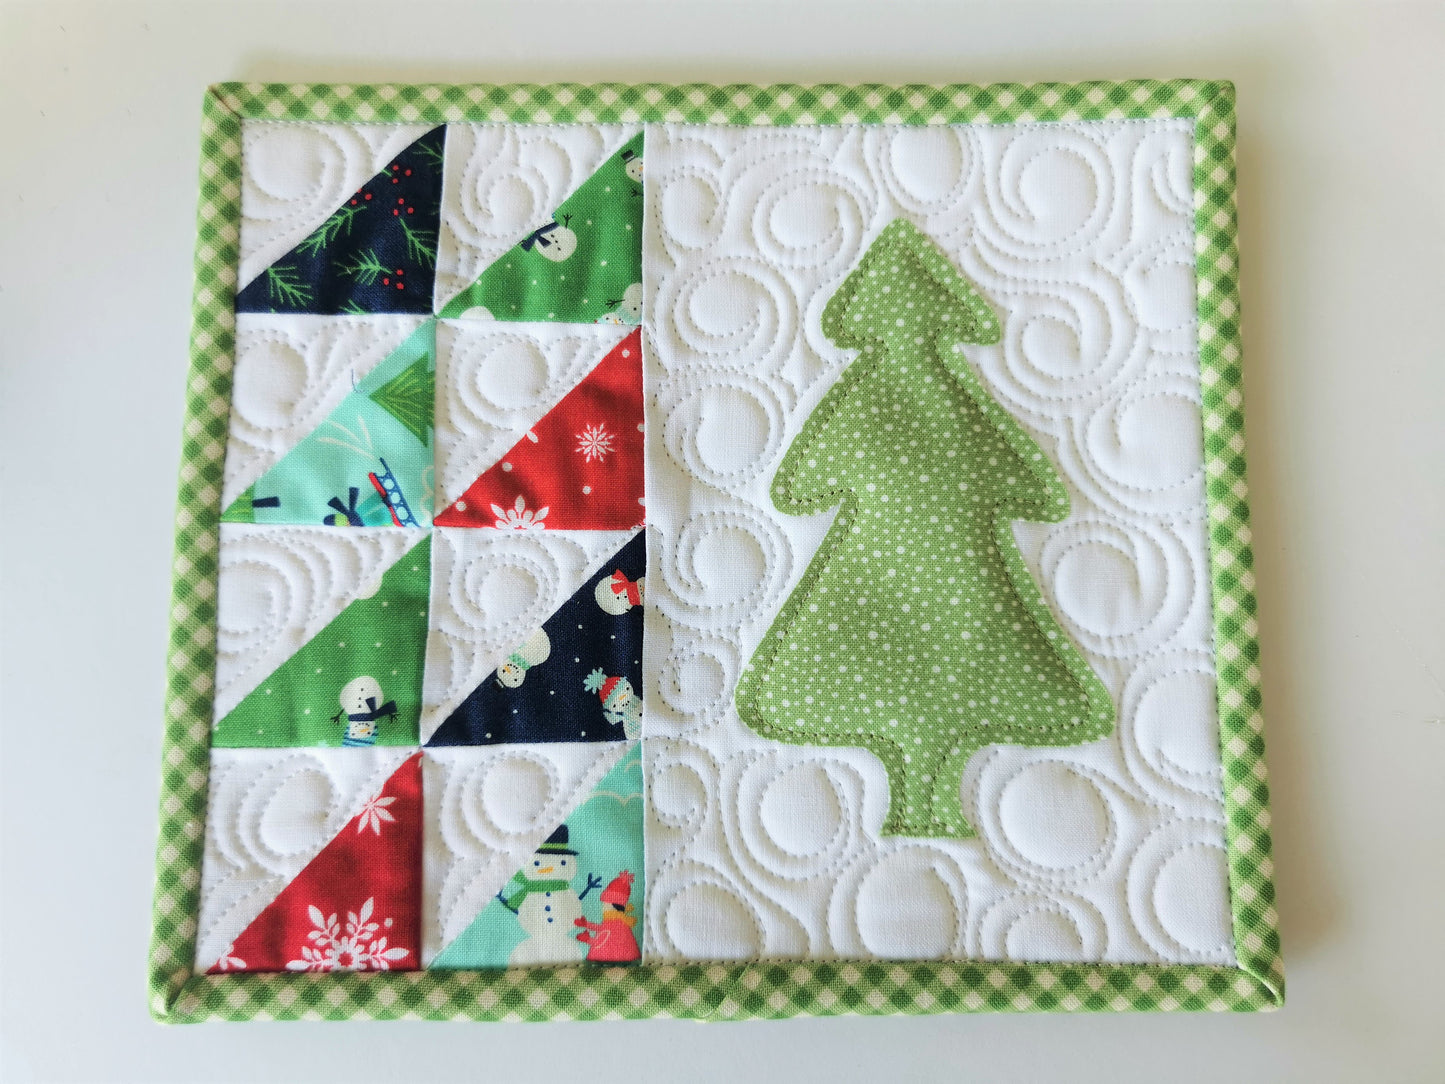 This mini christmas tree quilt features winter theme fabrics on white background. Small triangle patchwork down the left side with a green polka dot christmas tree on the right. Binding is a green gingham.